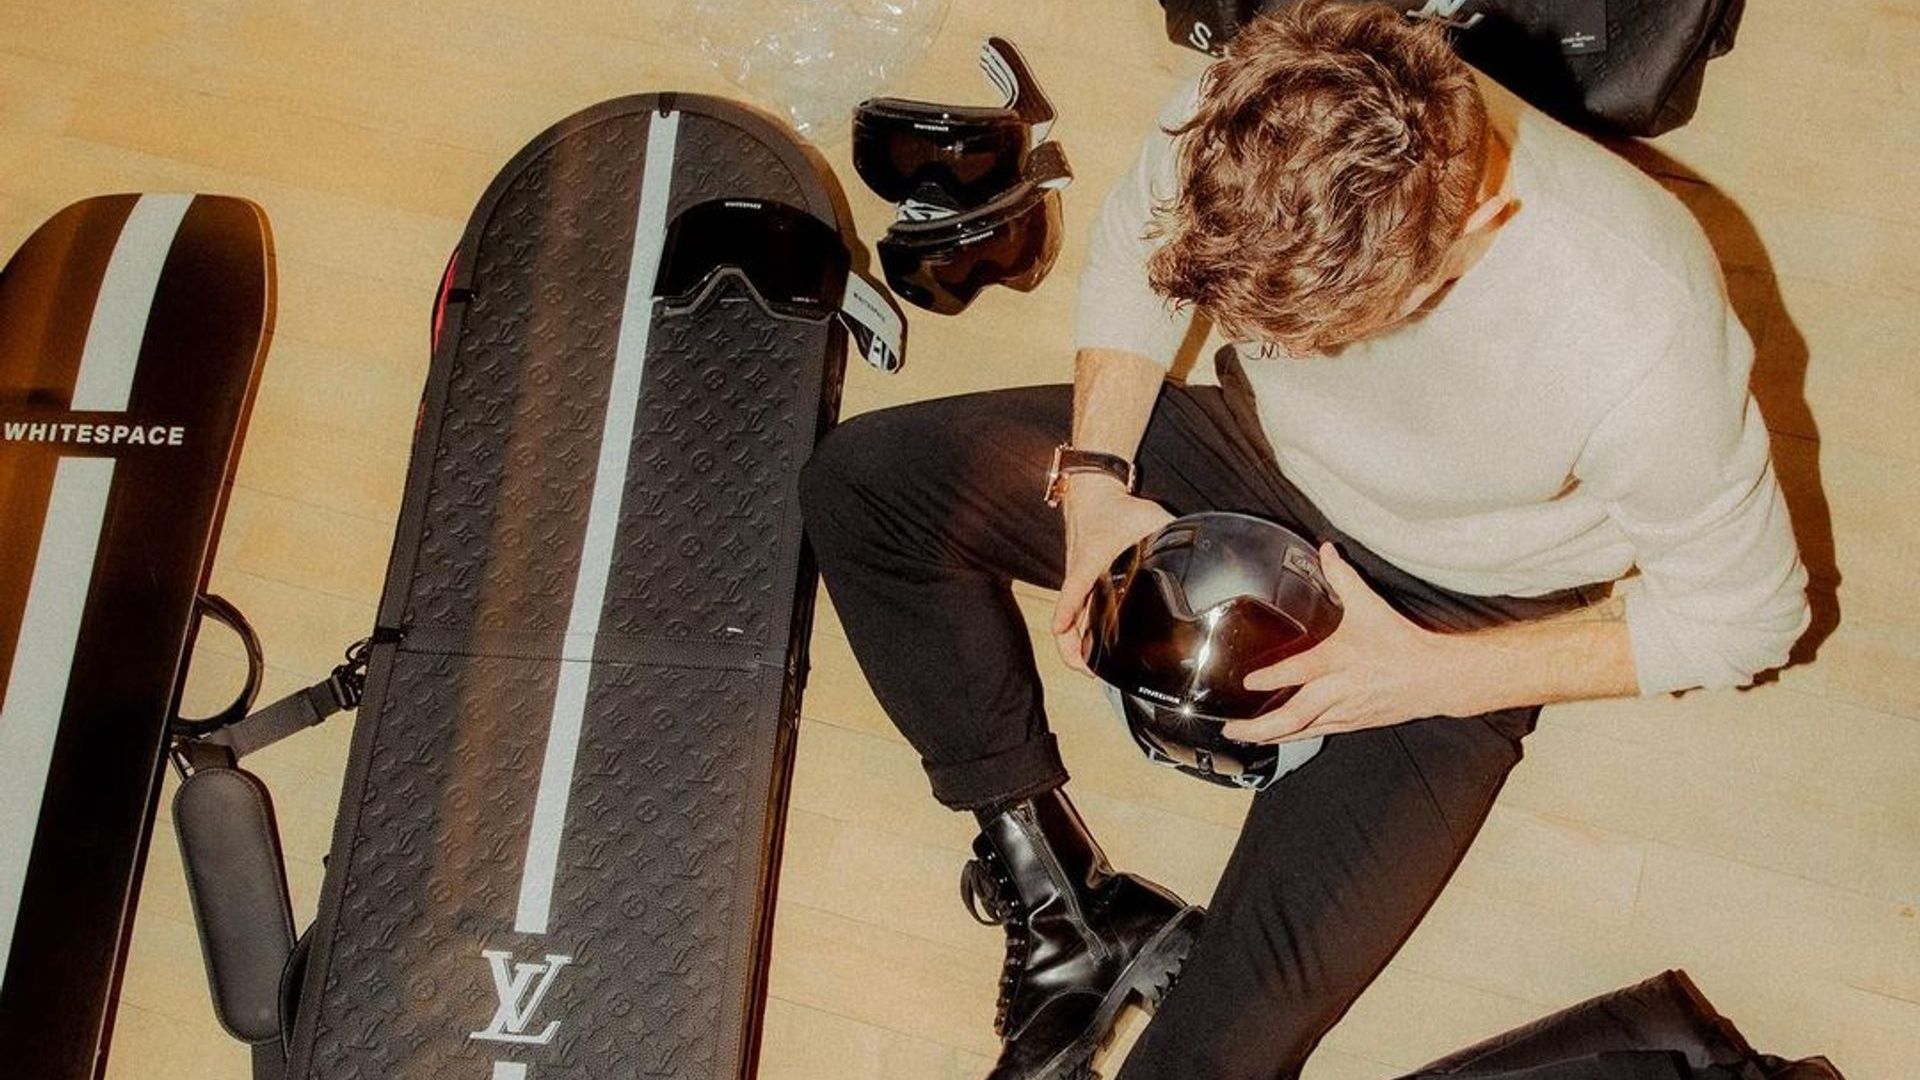 Shaun White unveils Louis Vuitton snowboard to honor the late Virgil Abloh  at 2022 Winter Olympics